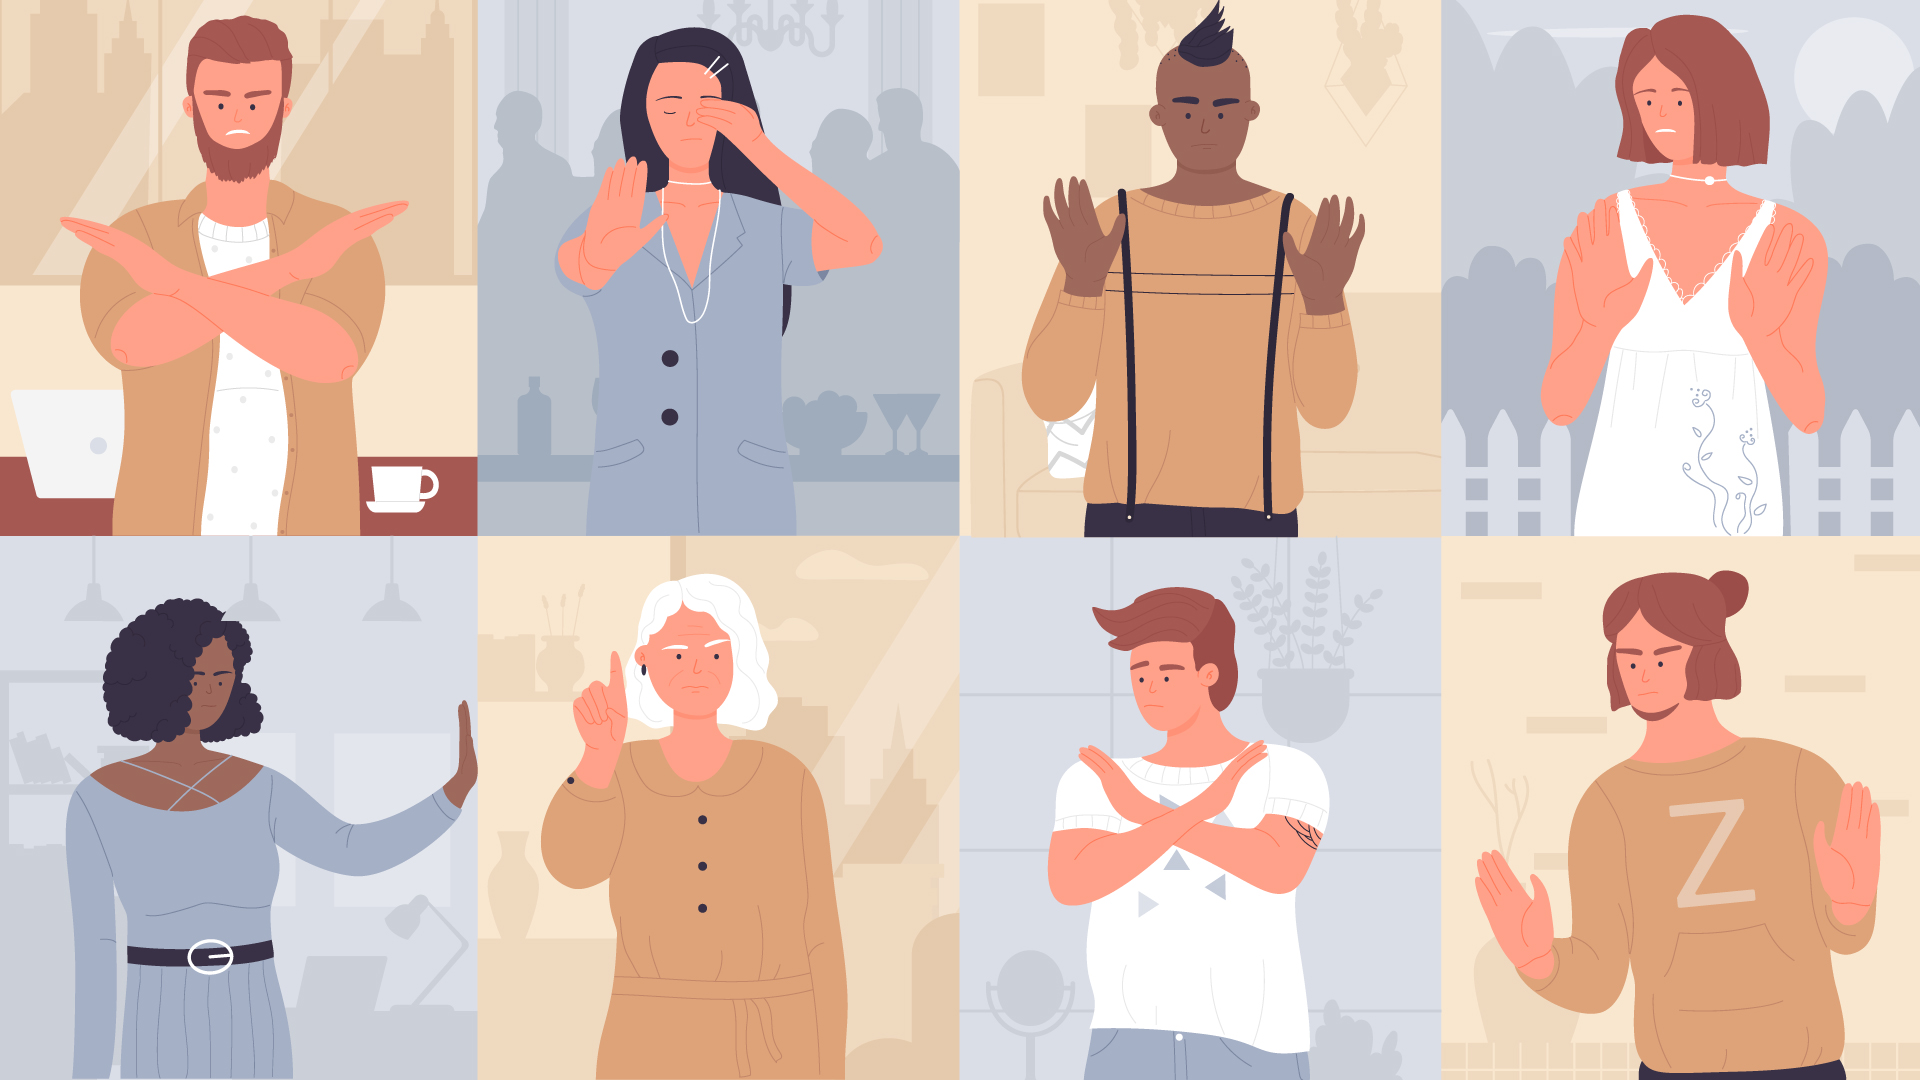 Multiple illustrations of men and women holding their arms in front of their bodies in rejecting gestures.